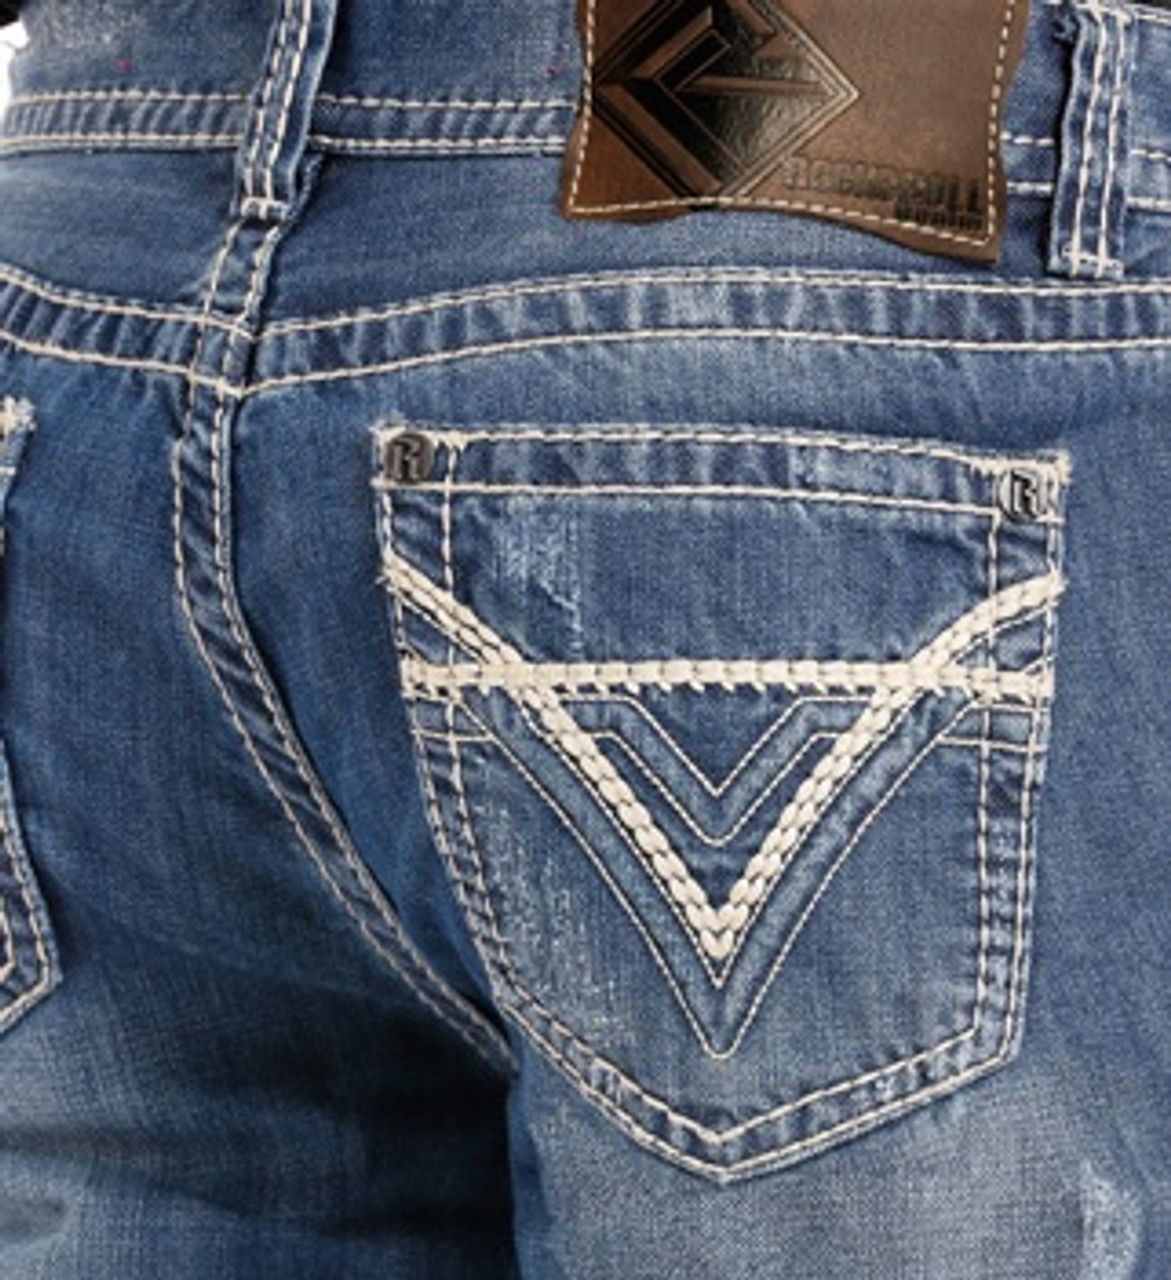 Are Rock & Roll Denim Jeans worth $80?